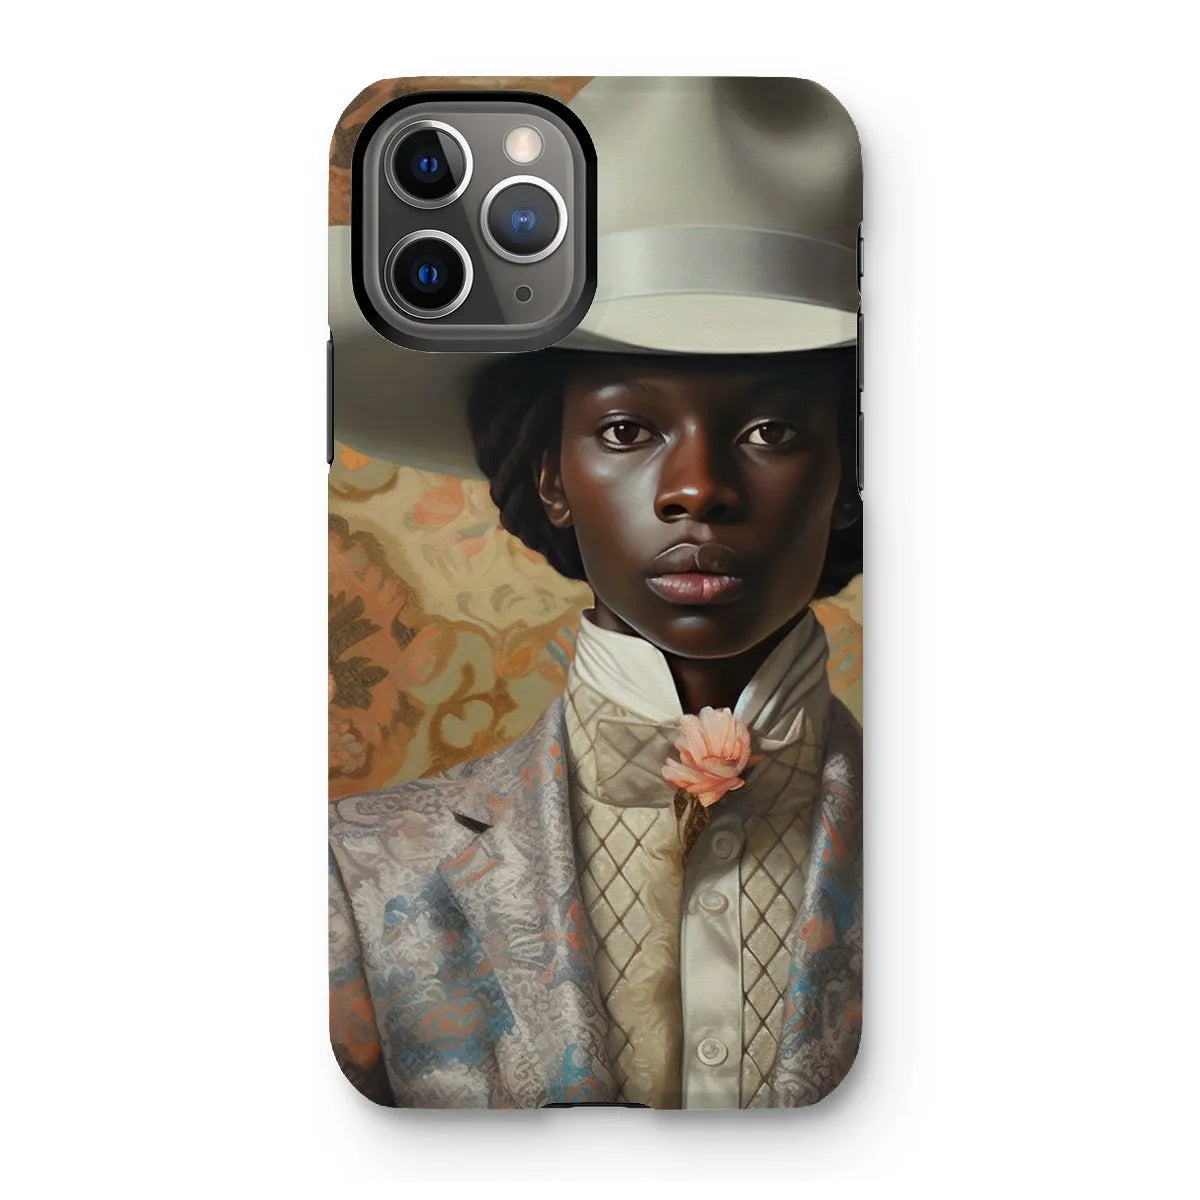 Caesar The Gay Cowboy - Gay Aesthetic Art Phone Case - Iphone 11 Pro / Matte - Mobile Phone Cases - Aesthetic Art